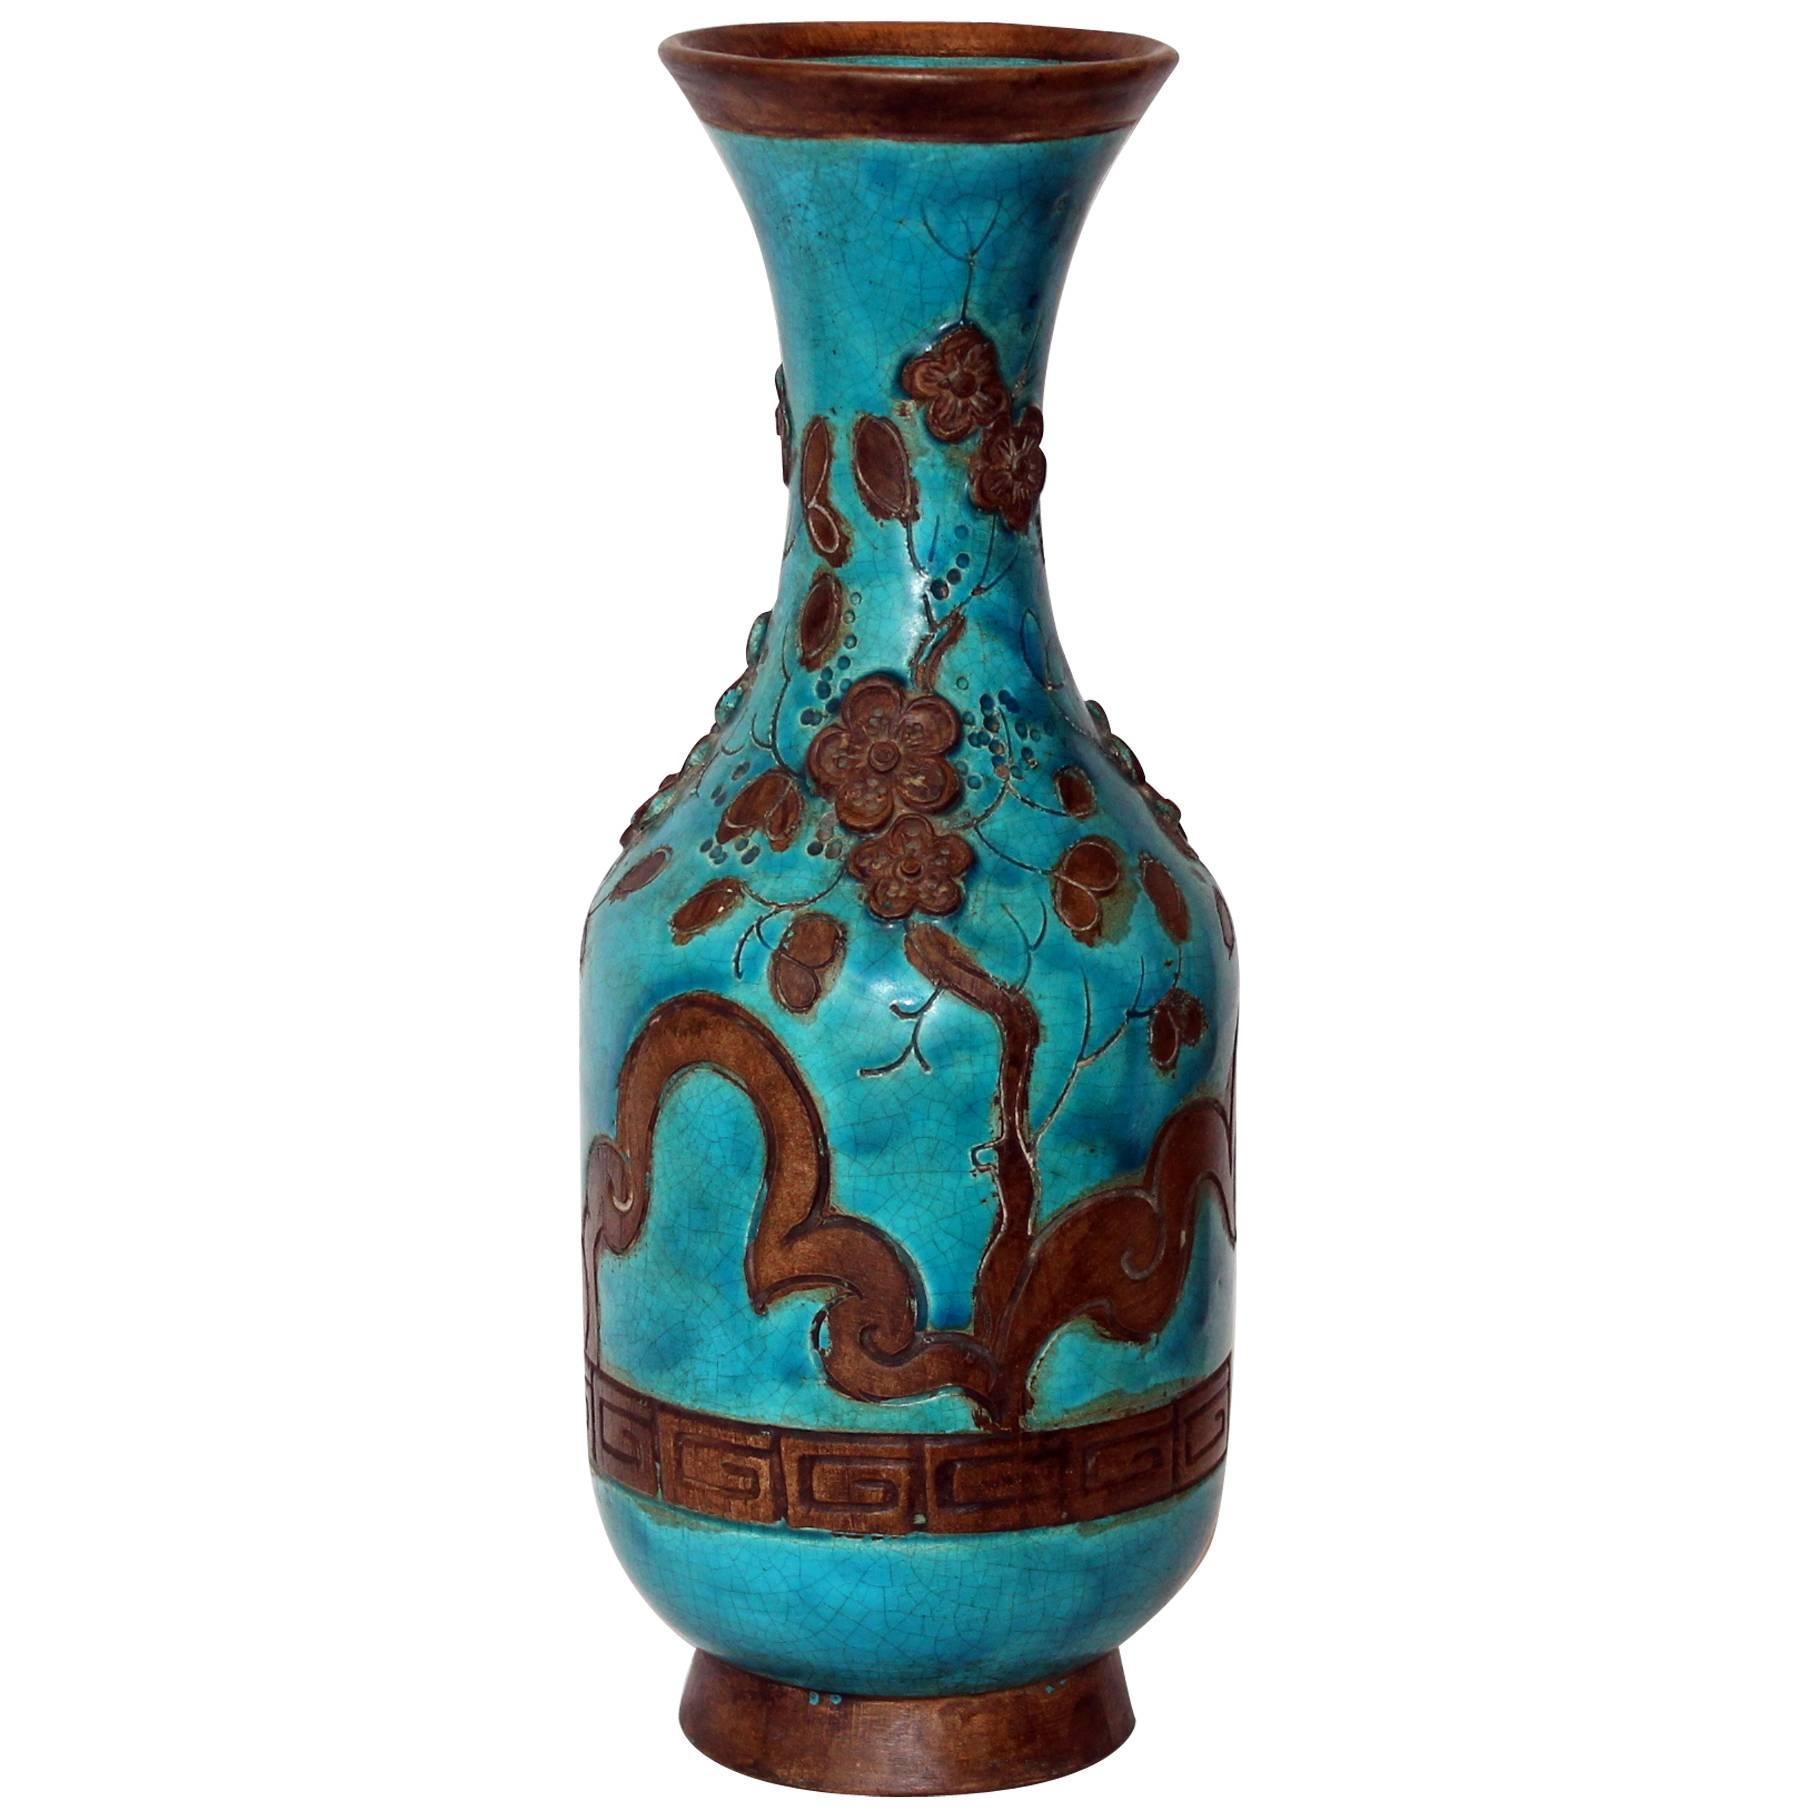 Vintage Turquoise Zaccagnini Italian Art Pottery Vase with Asian Motif